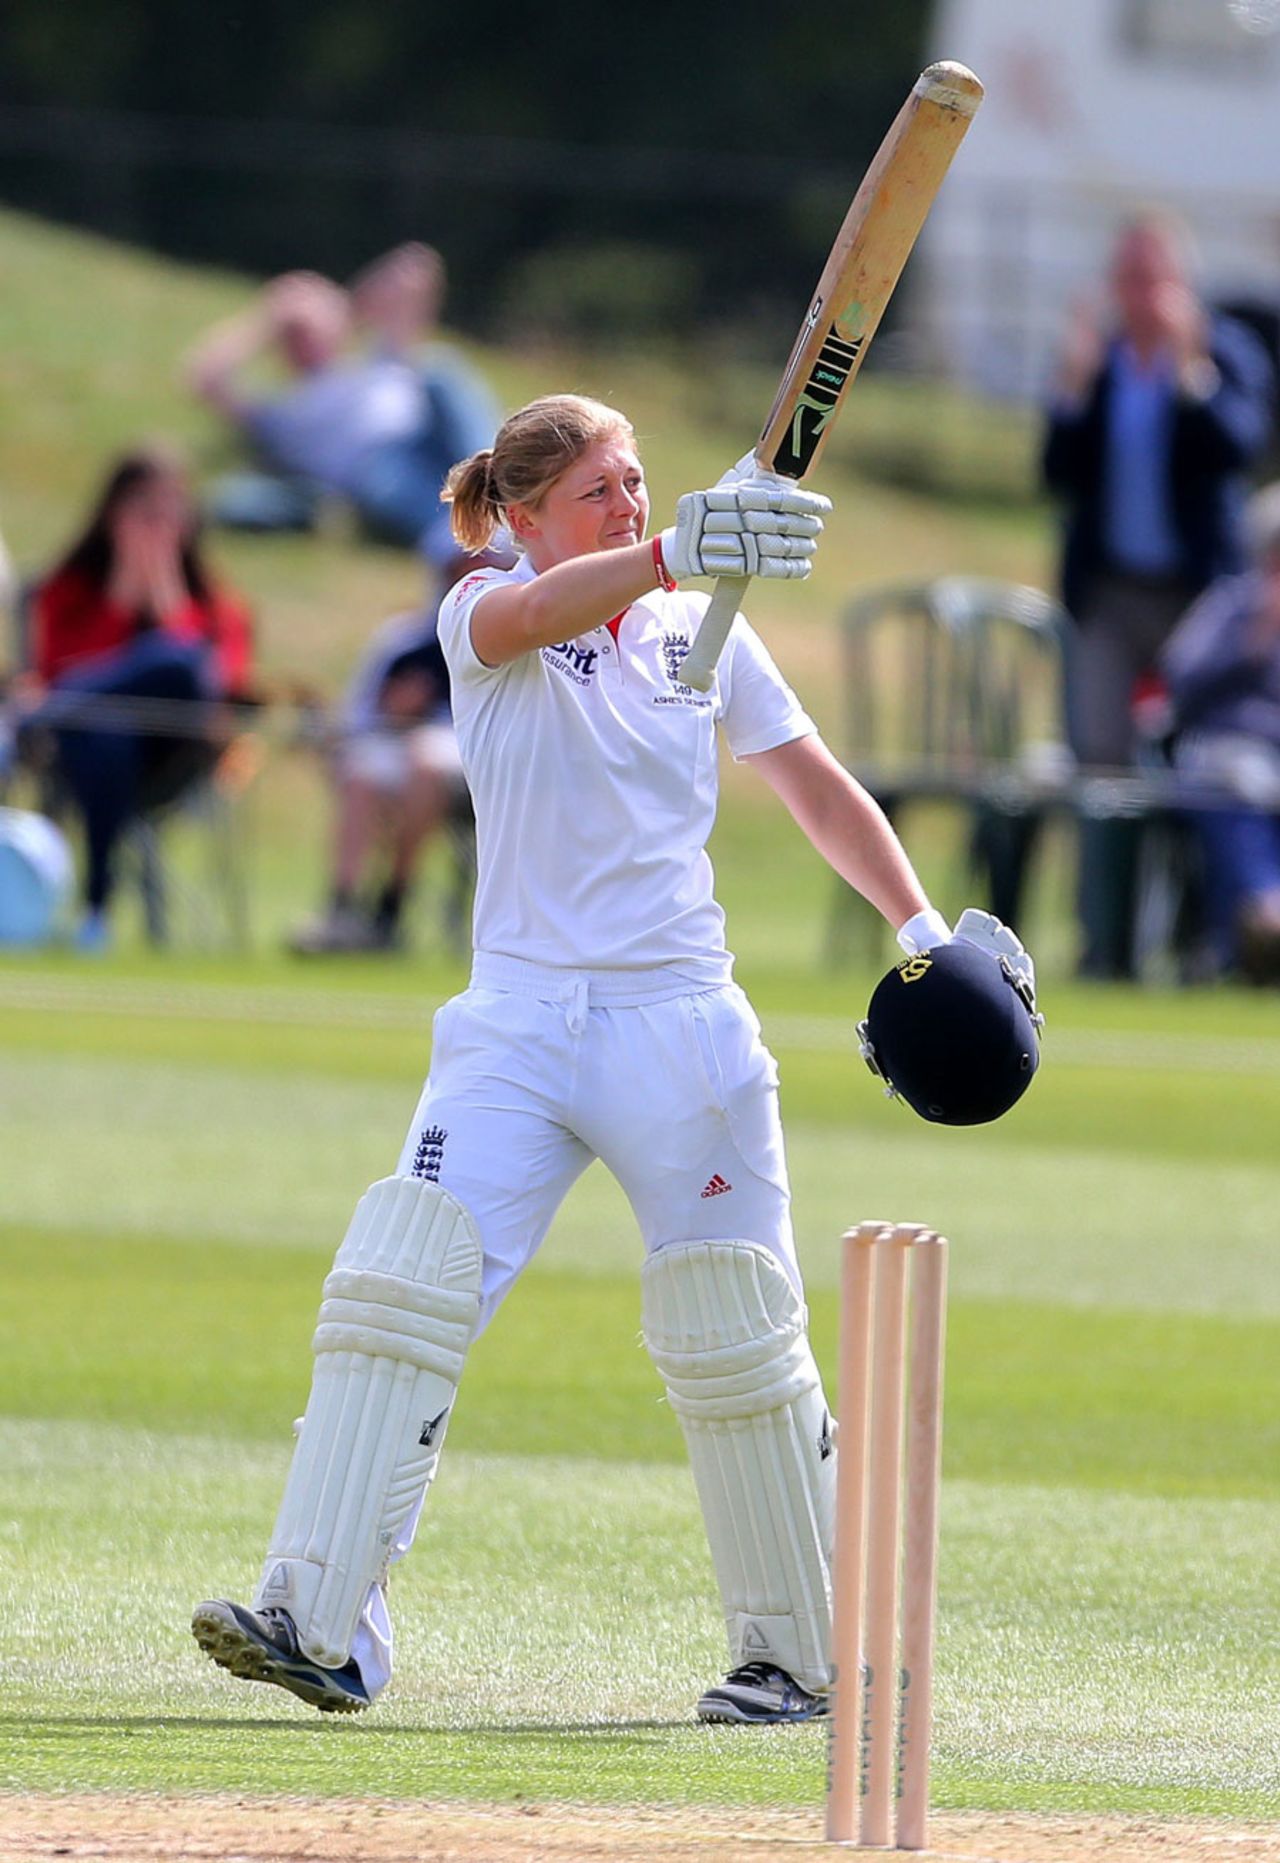 Heather Knight raises her bat after reaching a century, England Women v Australia Women, Only Test, 3rd day, Wormsley, August 13, 2013